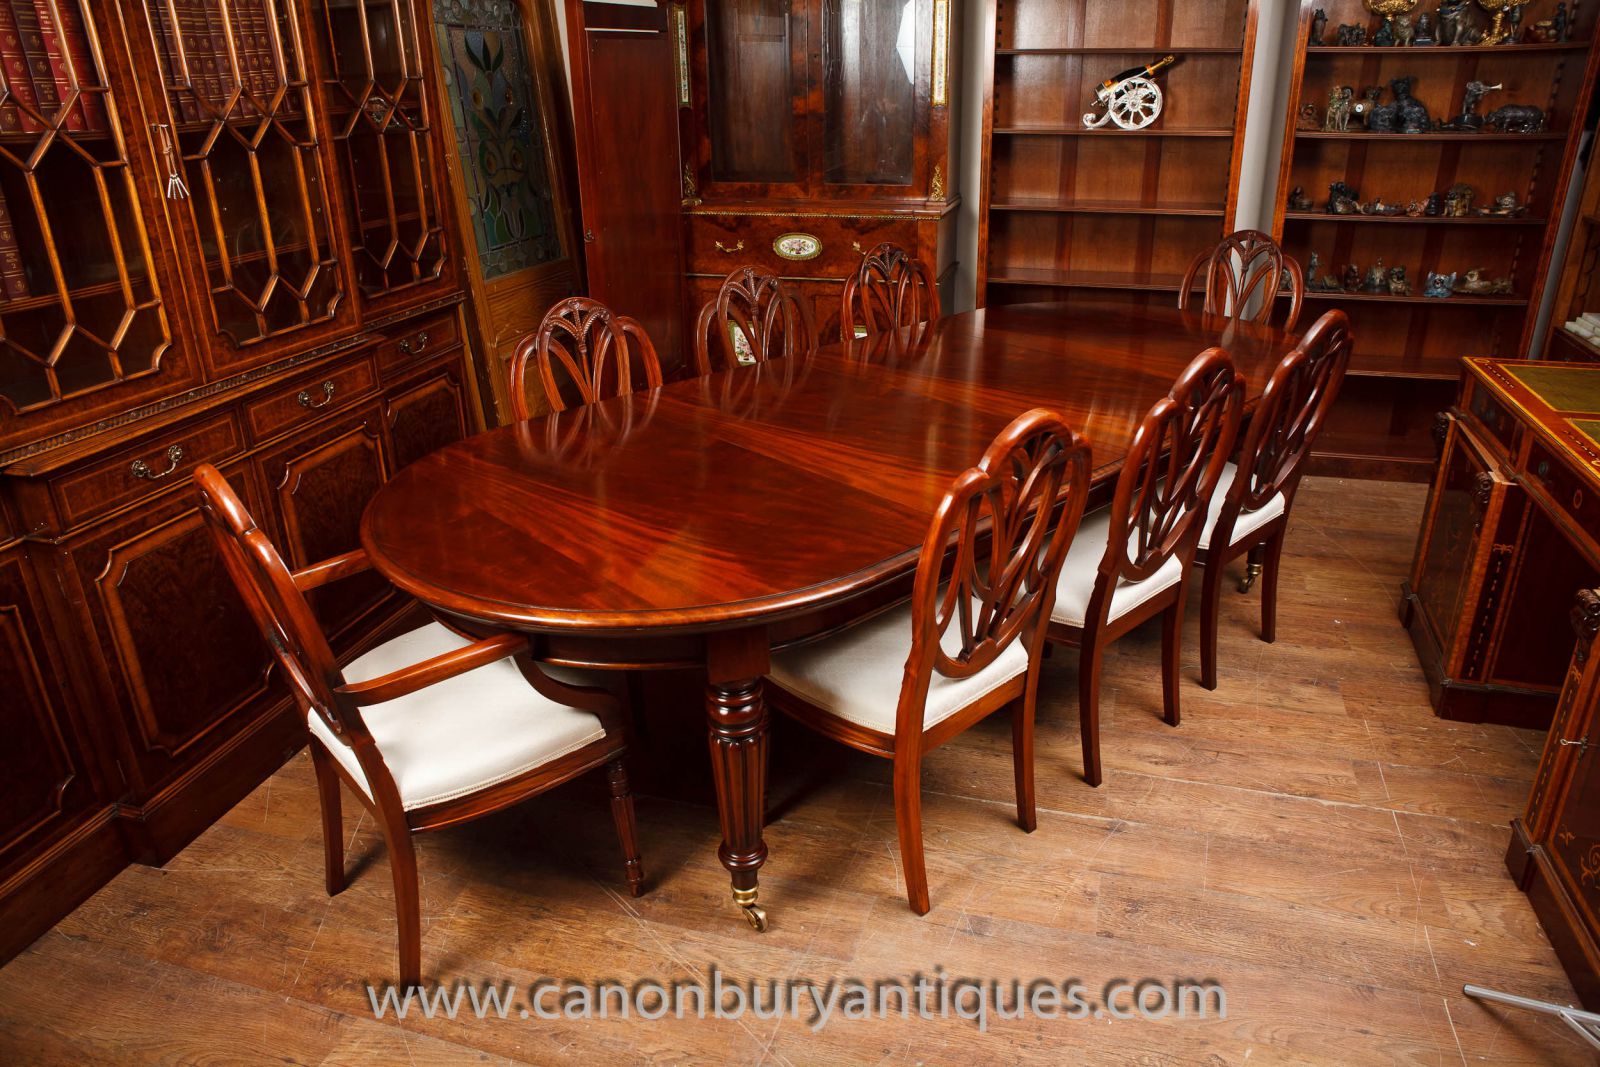 Sumptous mahogany dining table and set of Hepplewhite chairs to match